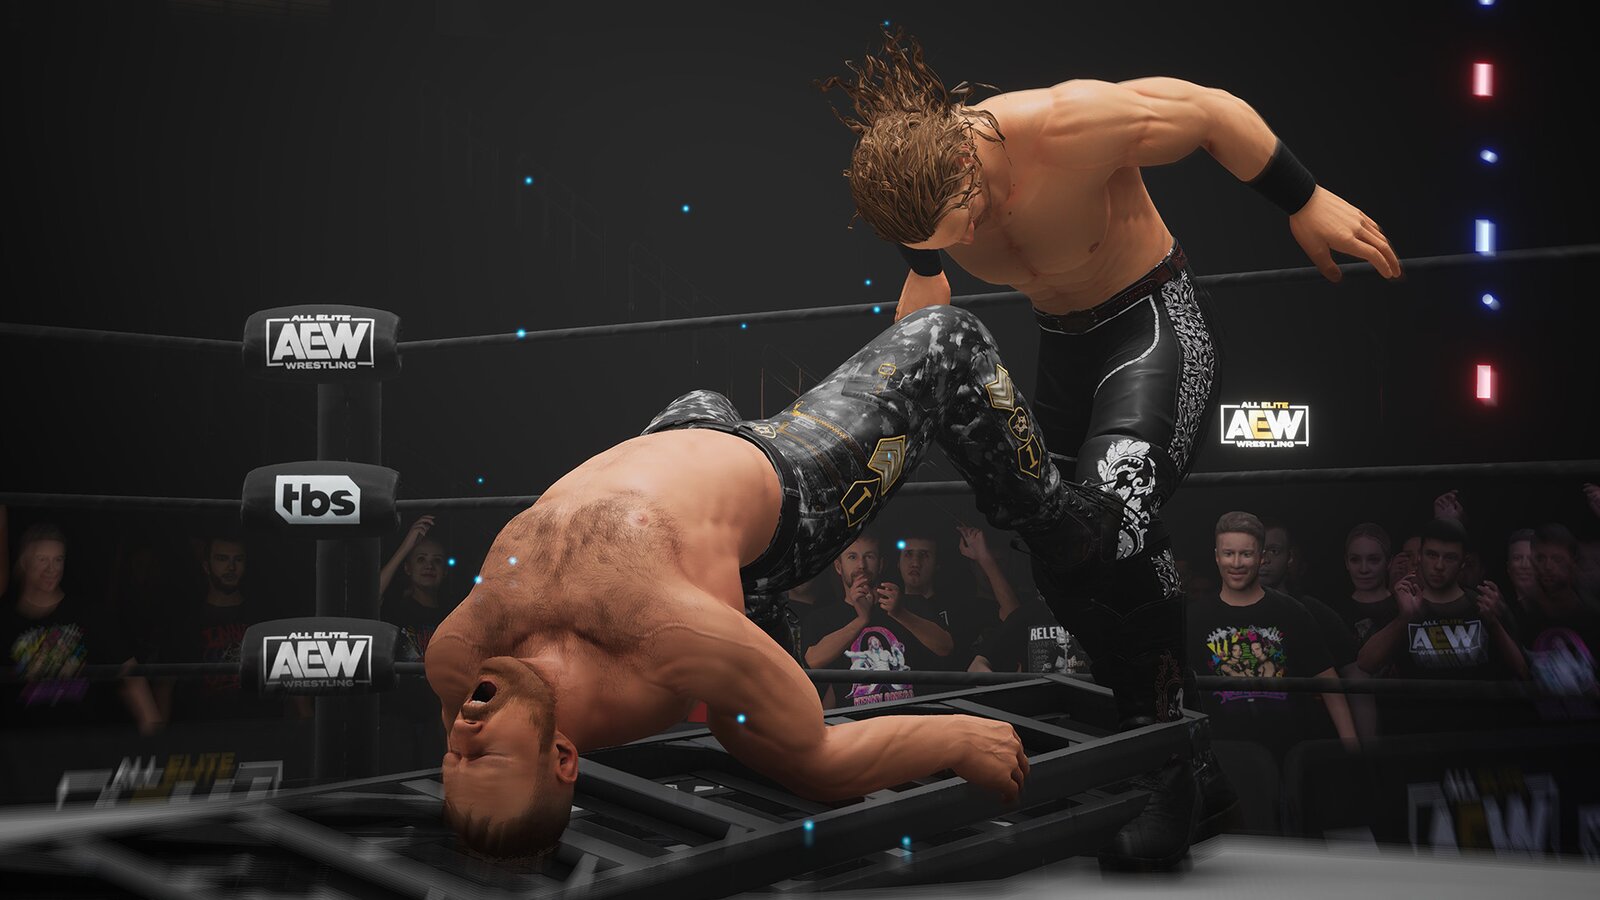 AEW: Fight Forever - Elite Edition